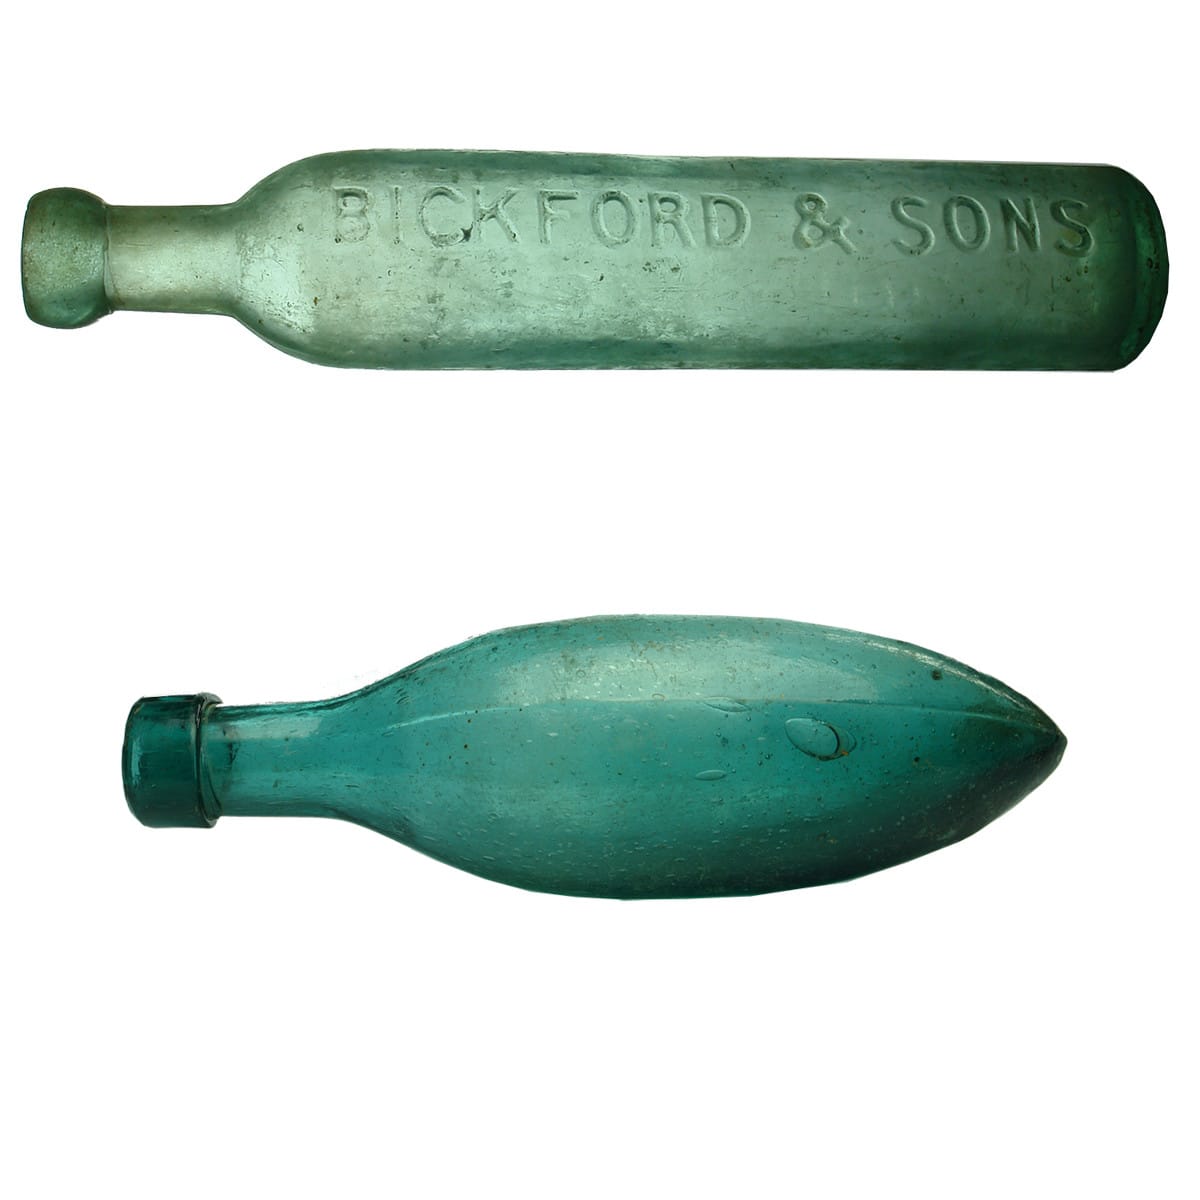 Pair of Aerated Waters: Bickford & Sons, Adelaide flat foot Maugham; Plain Turquoise Torpedo.